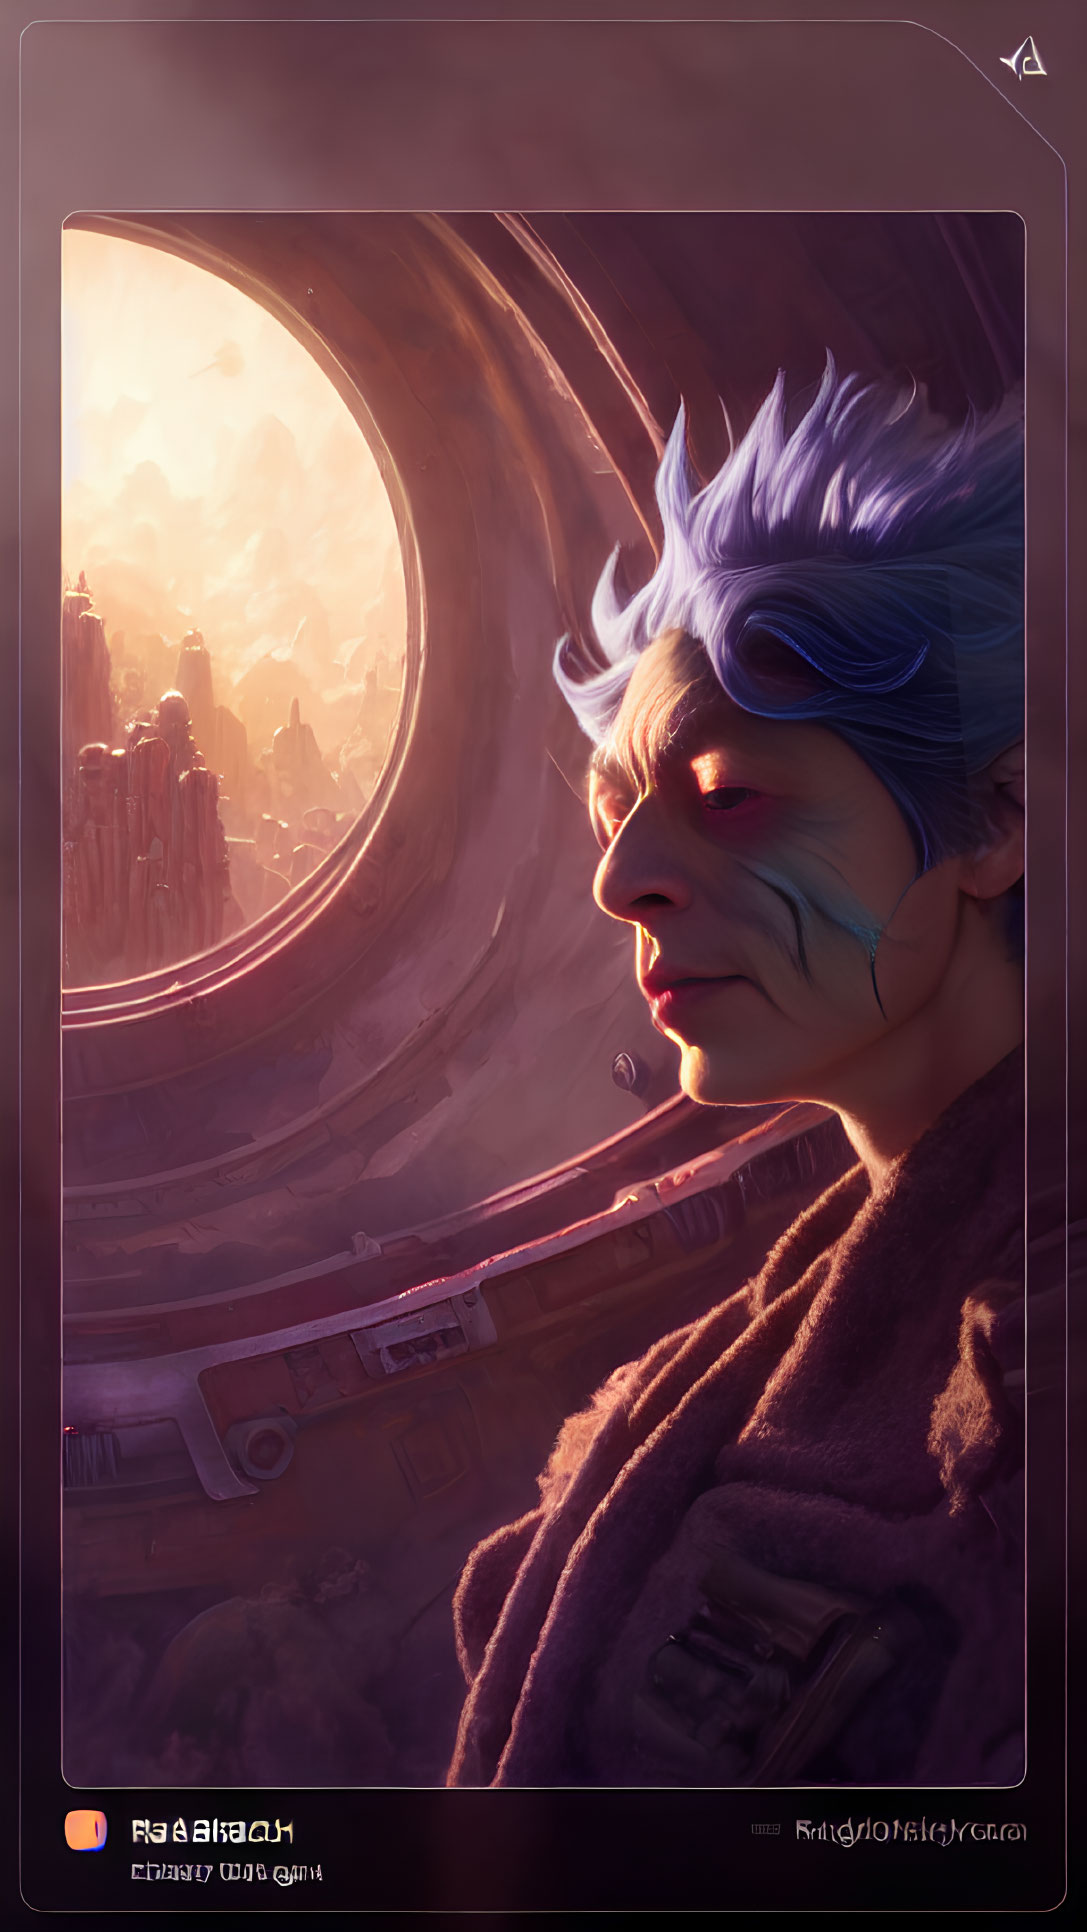 Illustrated character with blue hair gazes at futuristic cityscape from spacecraft window